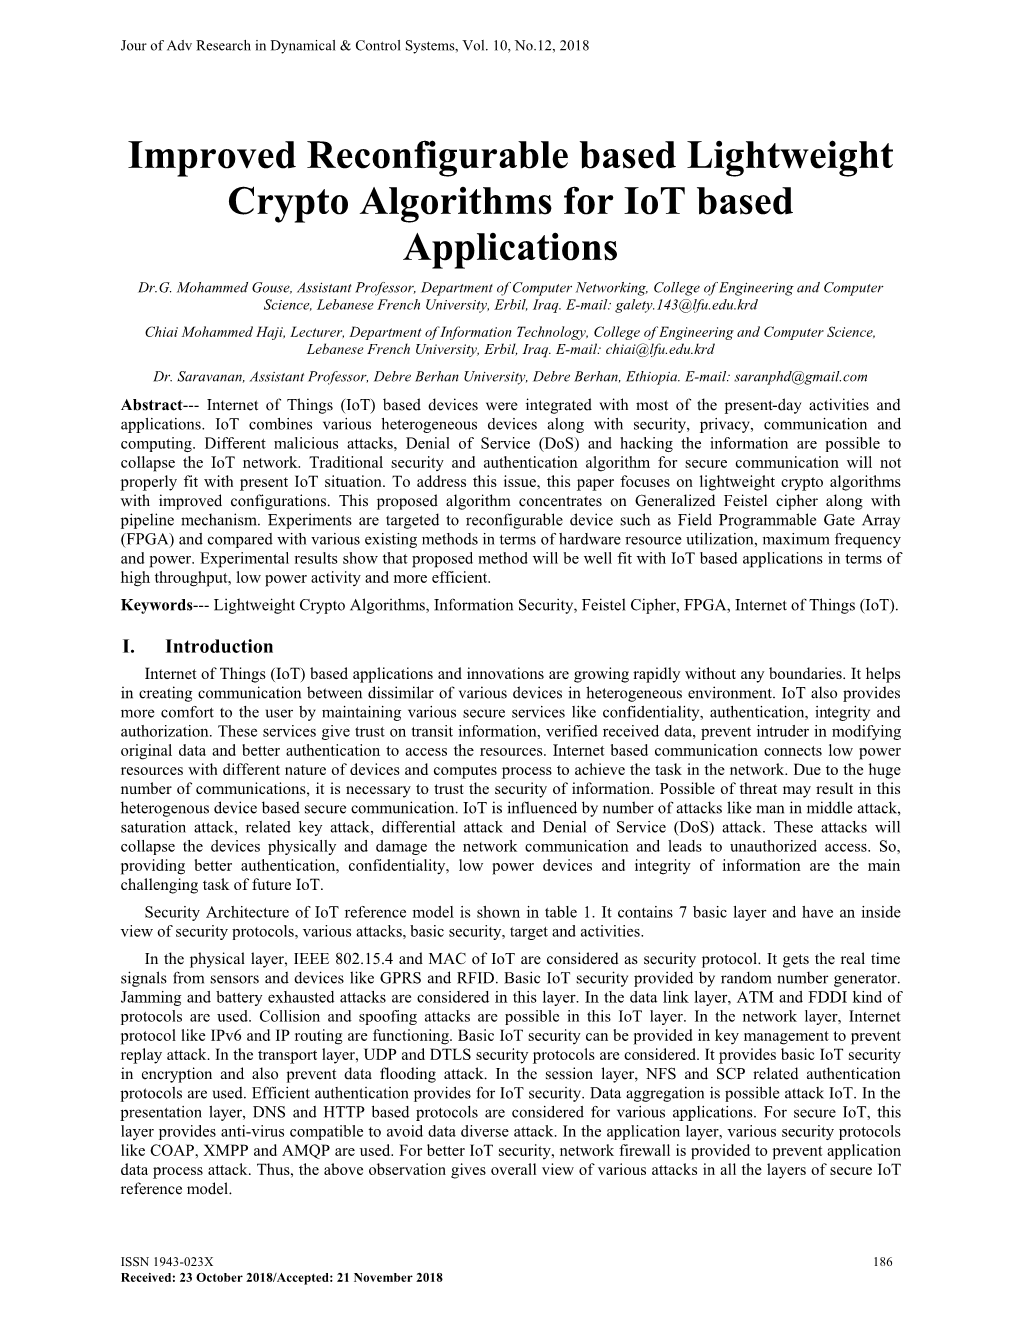 Improved Reconfigurable Based Lightweight Crypto Algorithms for Iot Based Applications Dr.G